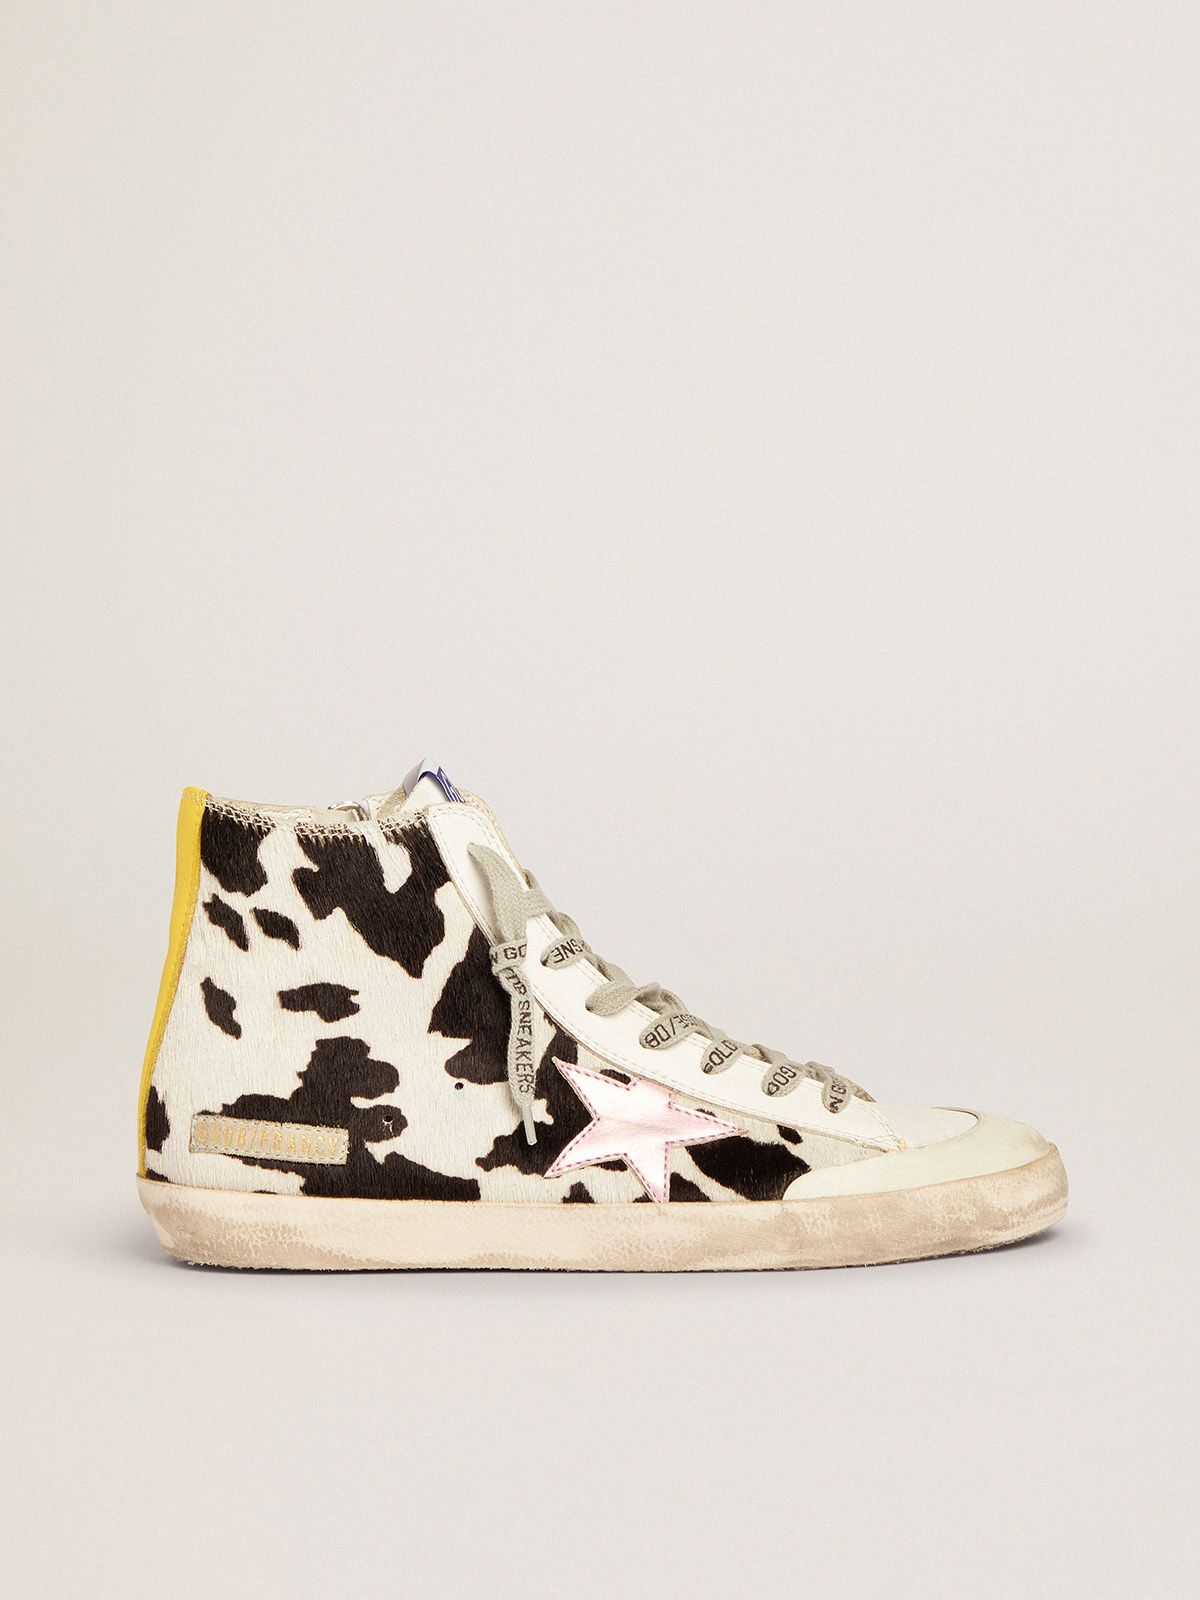 golden goose pink Penstar star sneakers leather pony in Francy skin with laminated cow-print